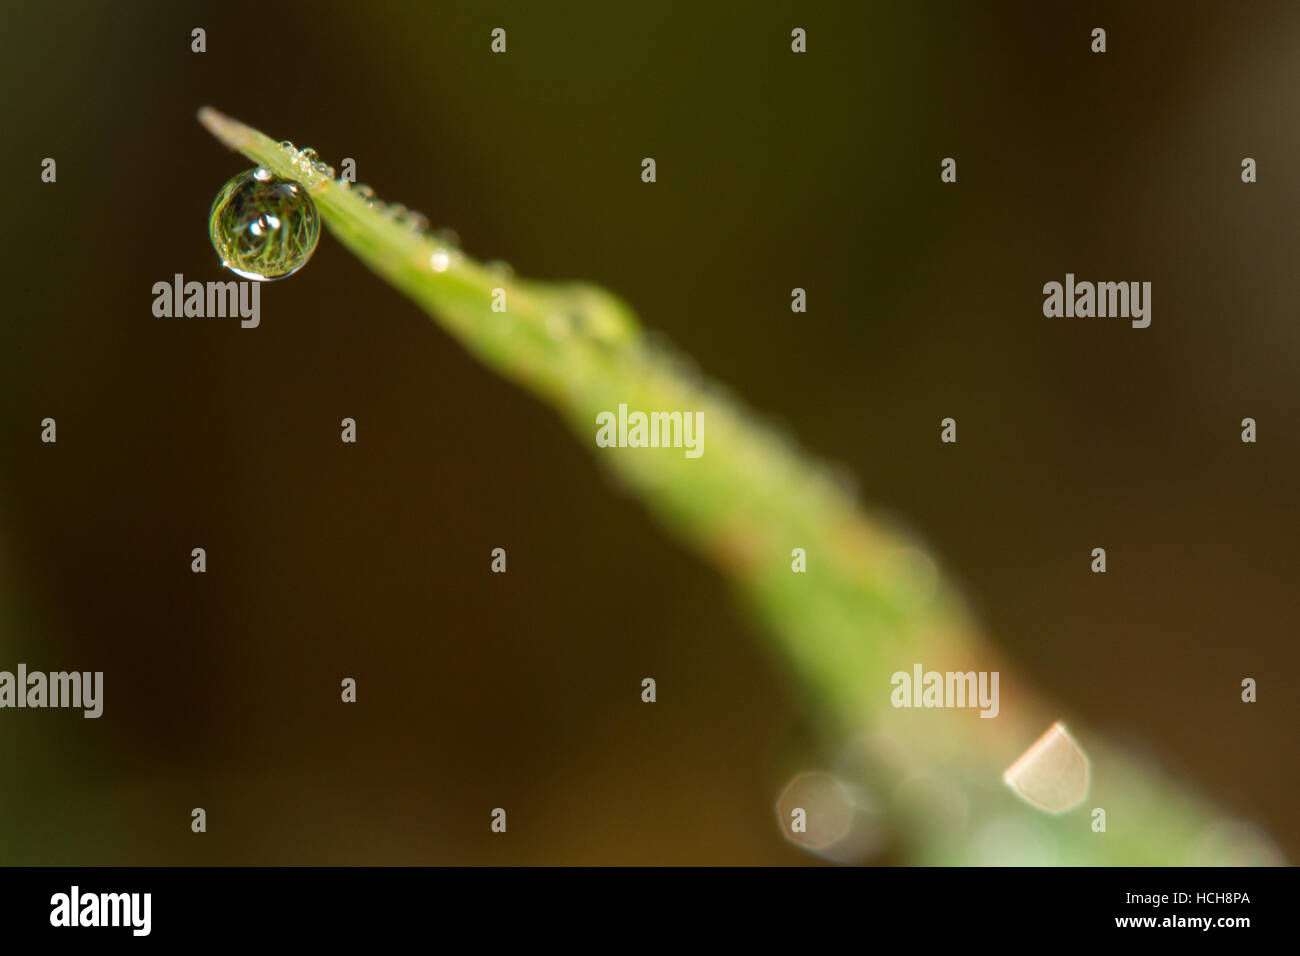 Refraction of the grassy ground in around drop of water suspended from a single blade of grass Stock Photo